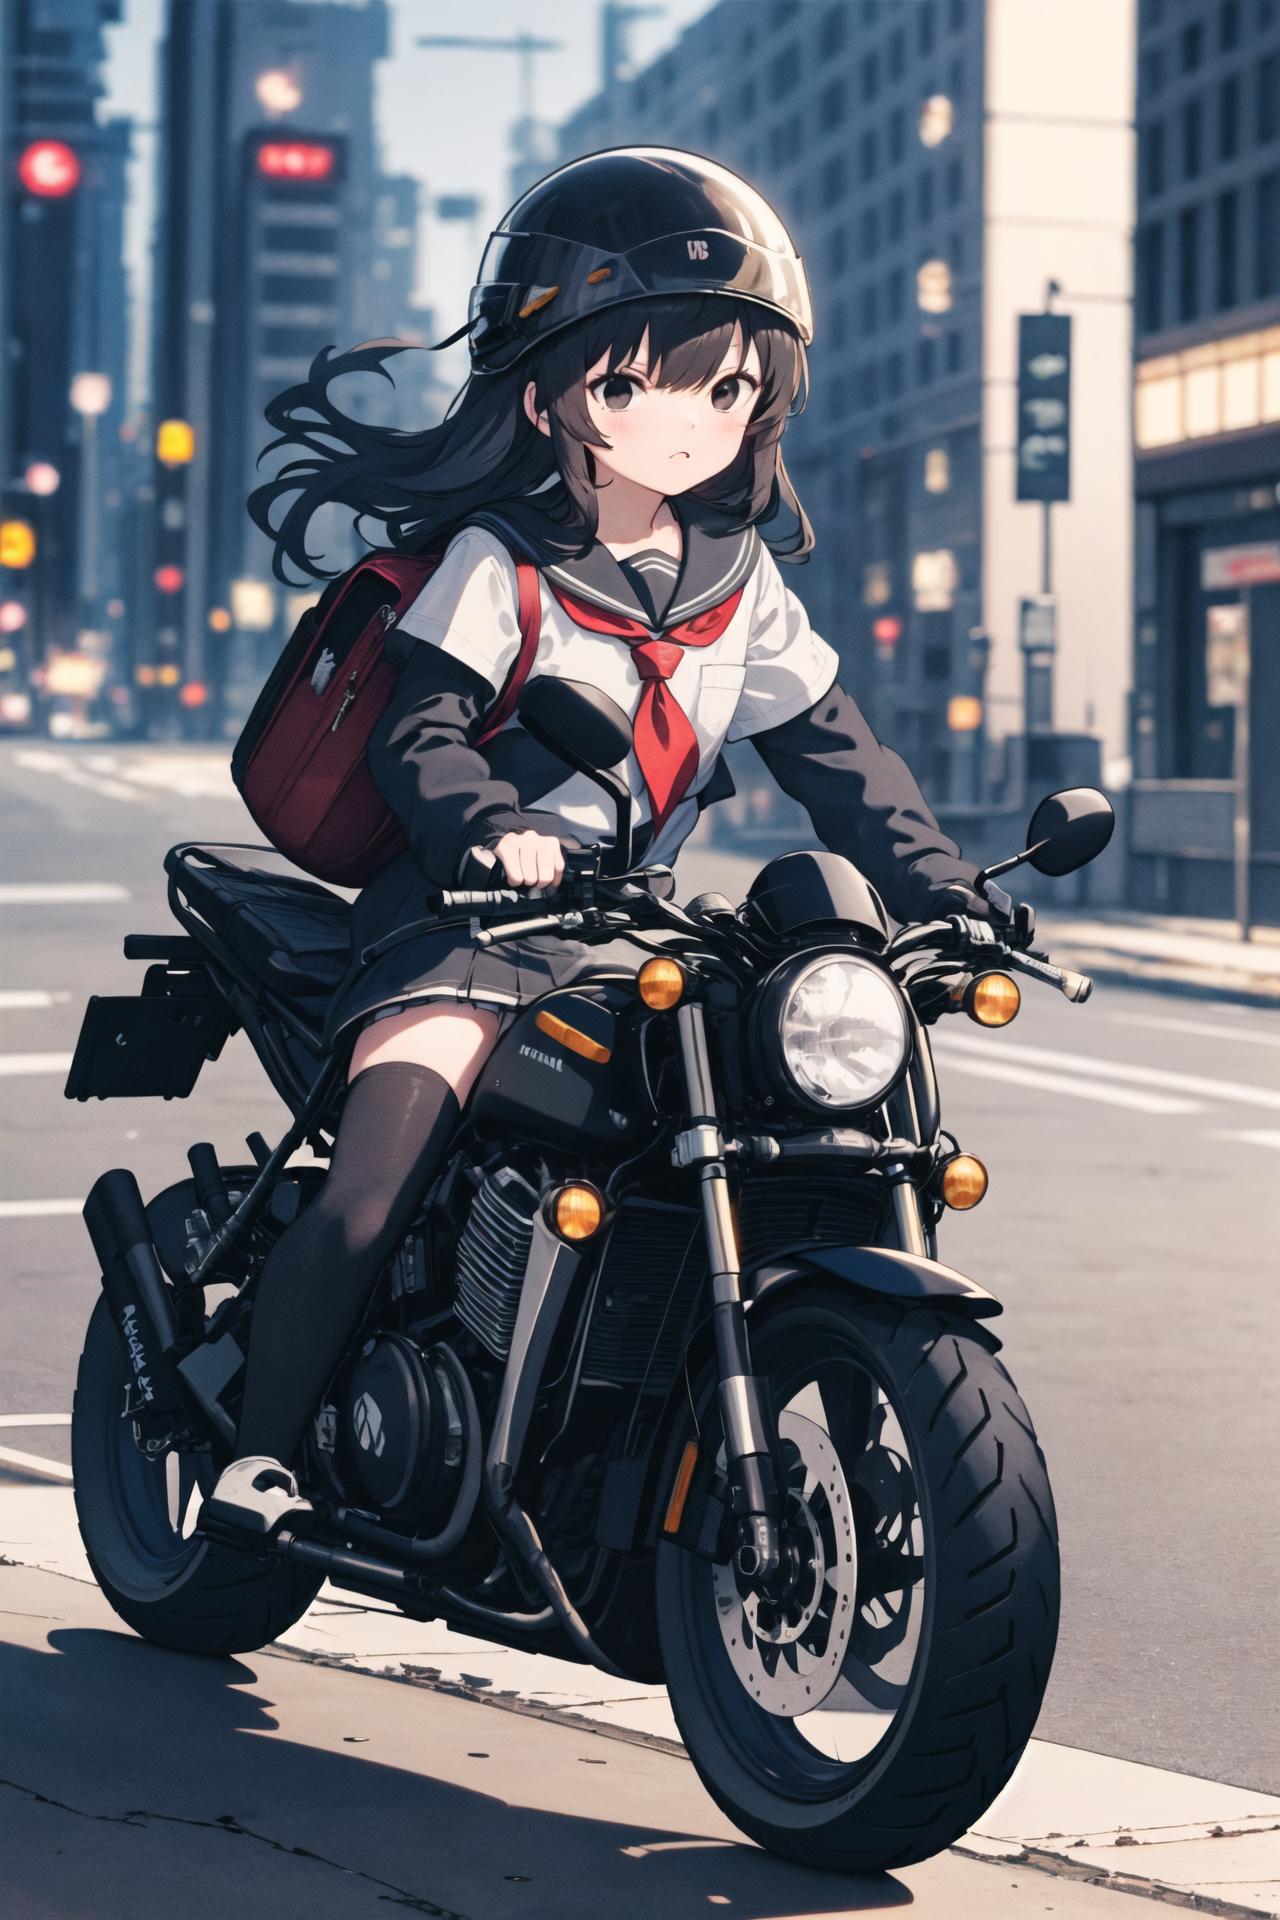 A young girl is wearing a school uniform while riding a motorcycle on a city street. She has a red backpack on her back and is holding onto the handlebars of the motorcycle. The scene appears to be a cartoon or animation, giving the image a whimsical and artistic touch.